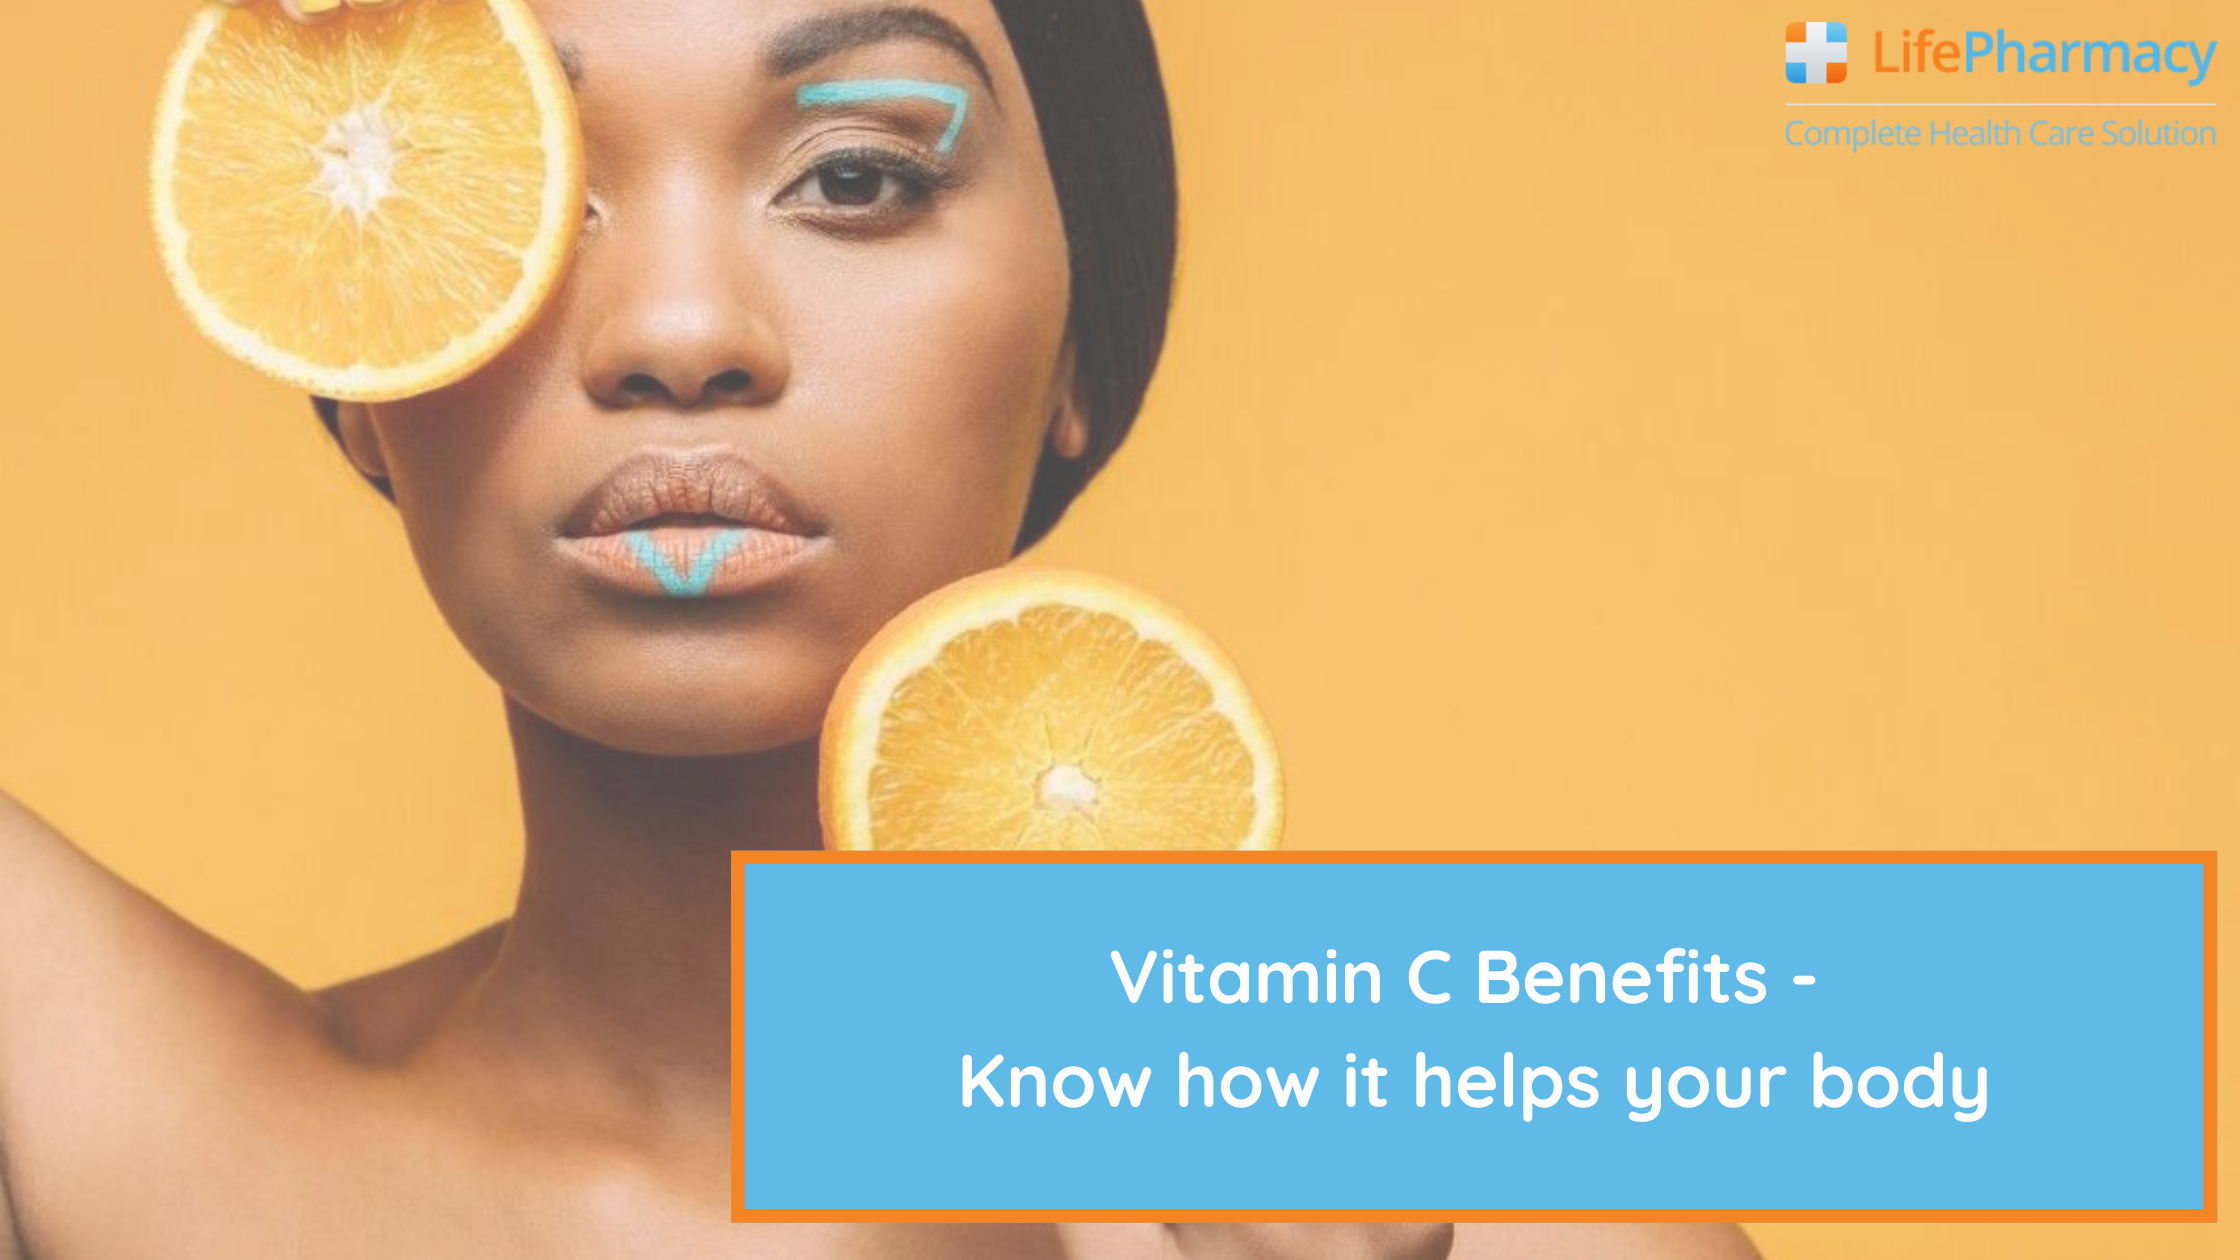 Vitamin C Benefits - Know how it helps your body